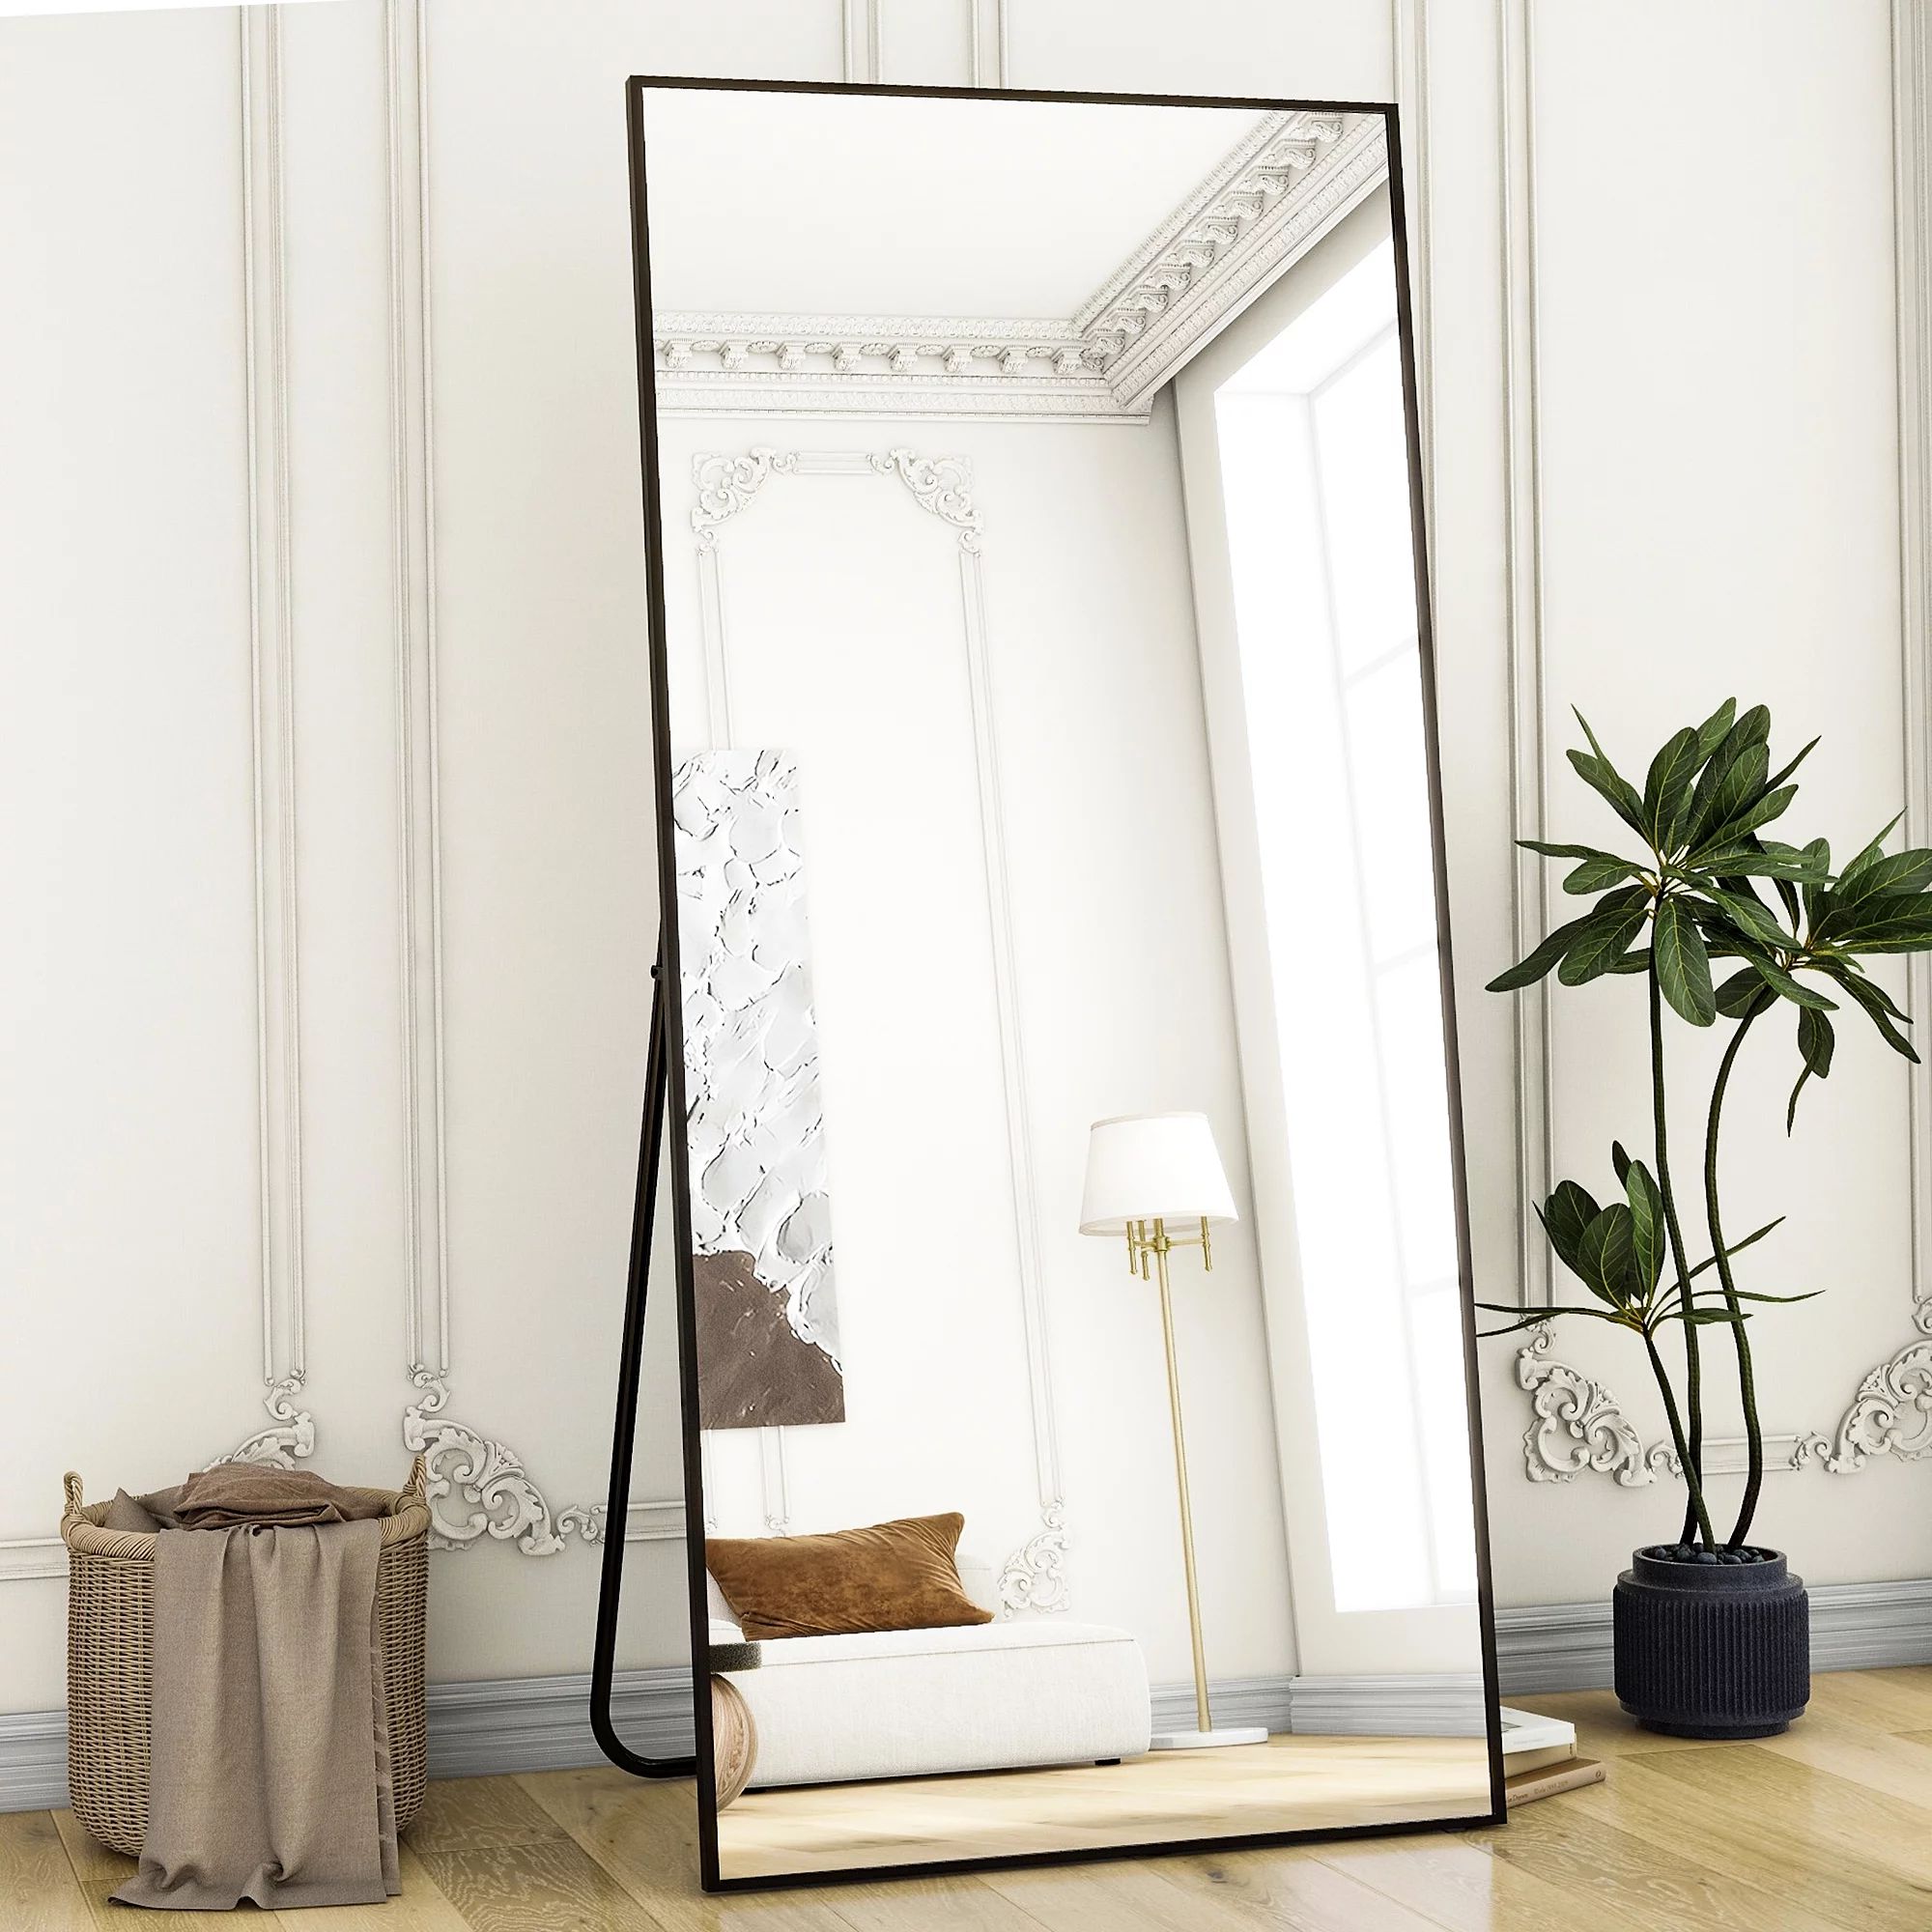 BEAUTYPEAK 76"x34" Full Length Mirror Rectangle Floor Mirrors for Standing Leaning or Hanging, Bl... | Walmart (US)